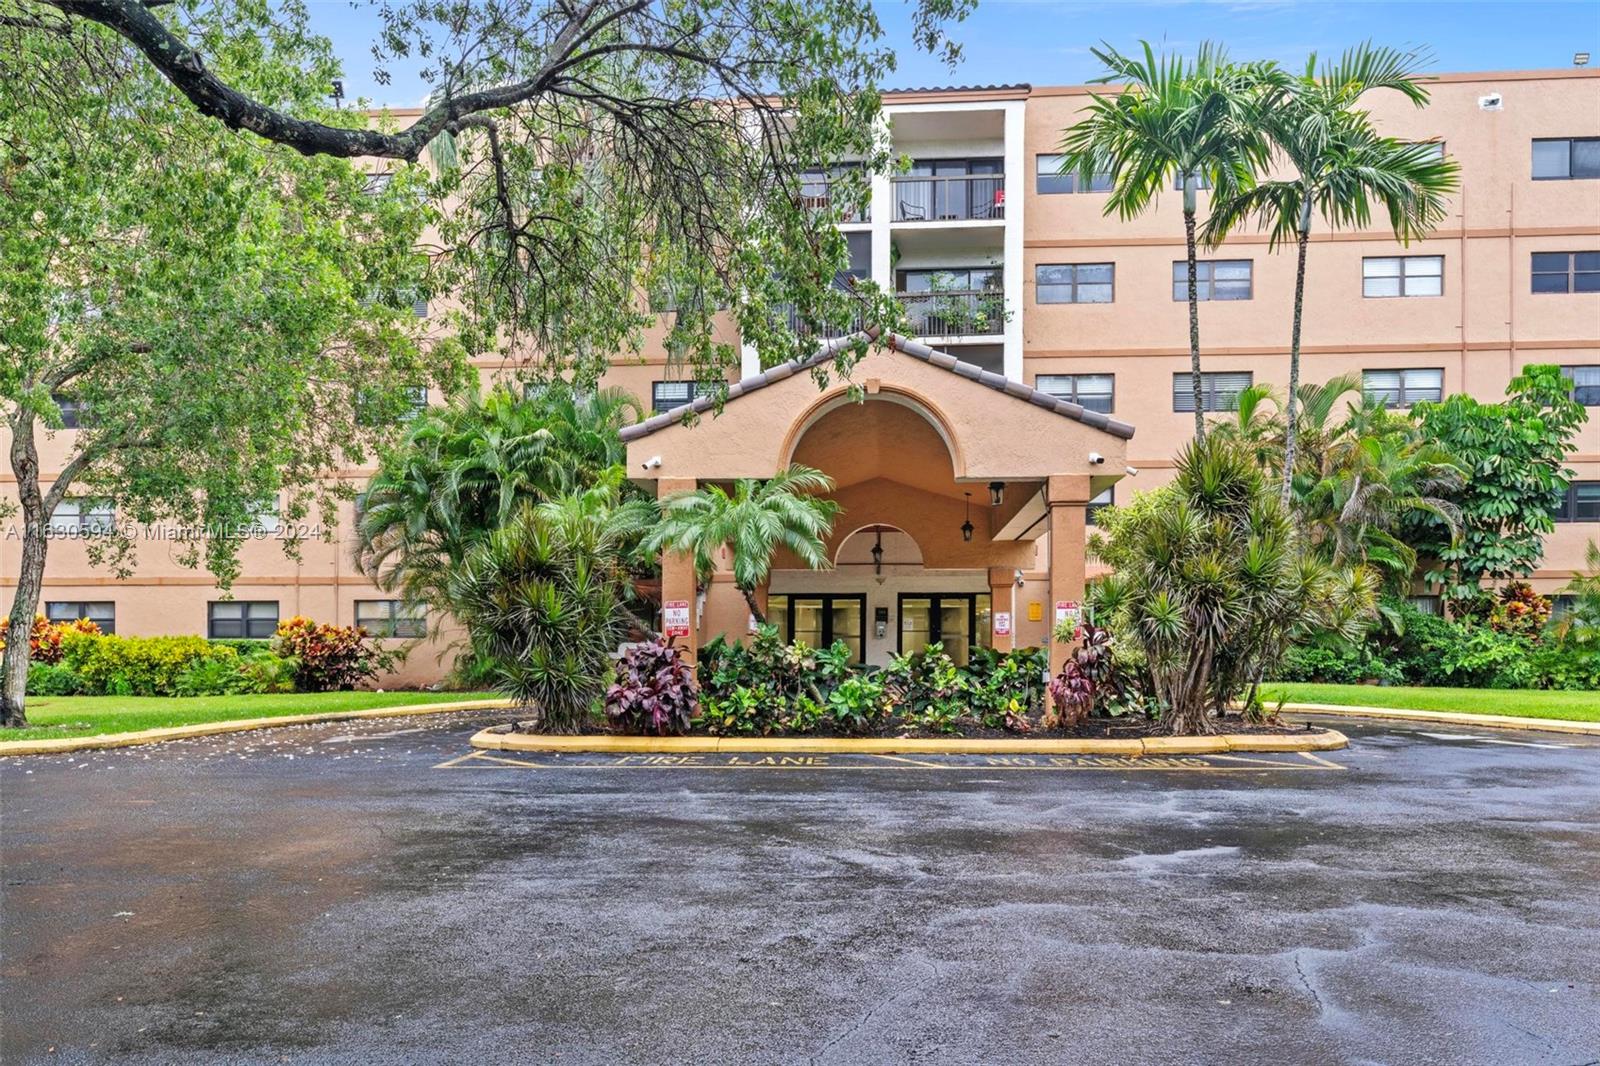 701 Nw 19th St St 501, Fort Lauderdale, Broward County, Florida - 2 Bedrooms  
2 Bathrooms - 